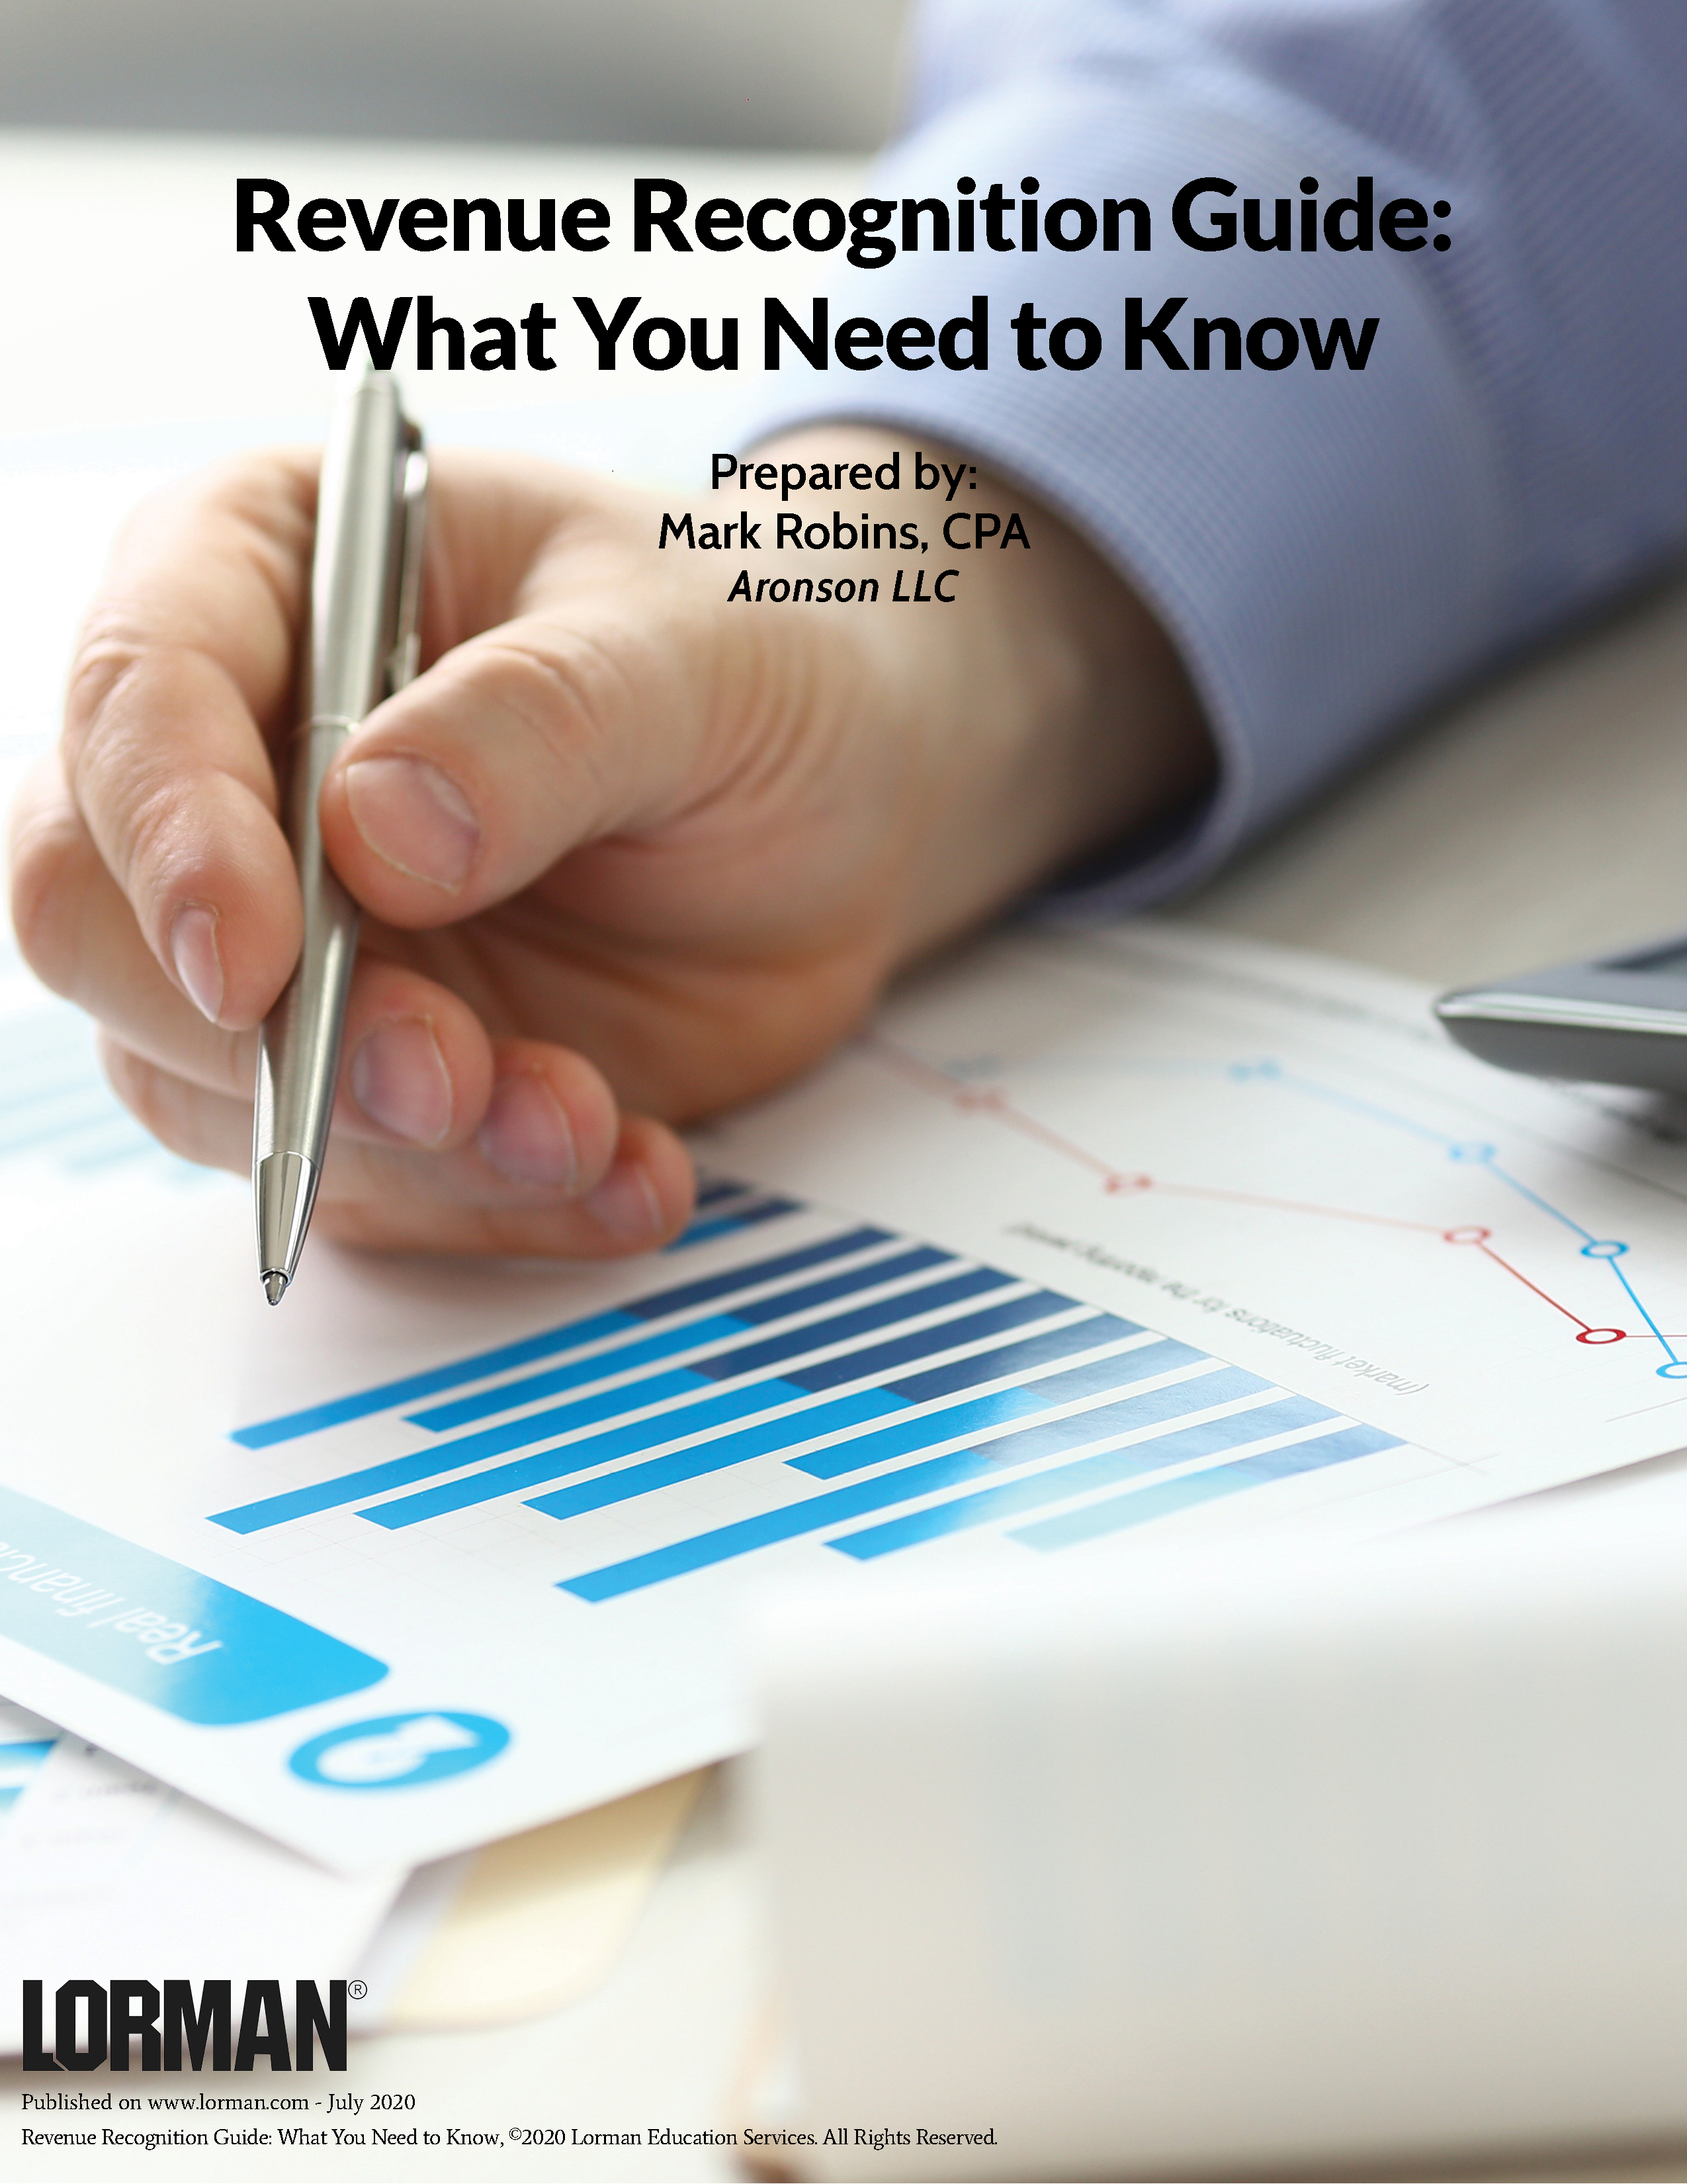 Revenue Recognition Guide: What You Need to Know